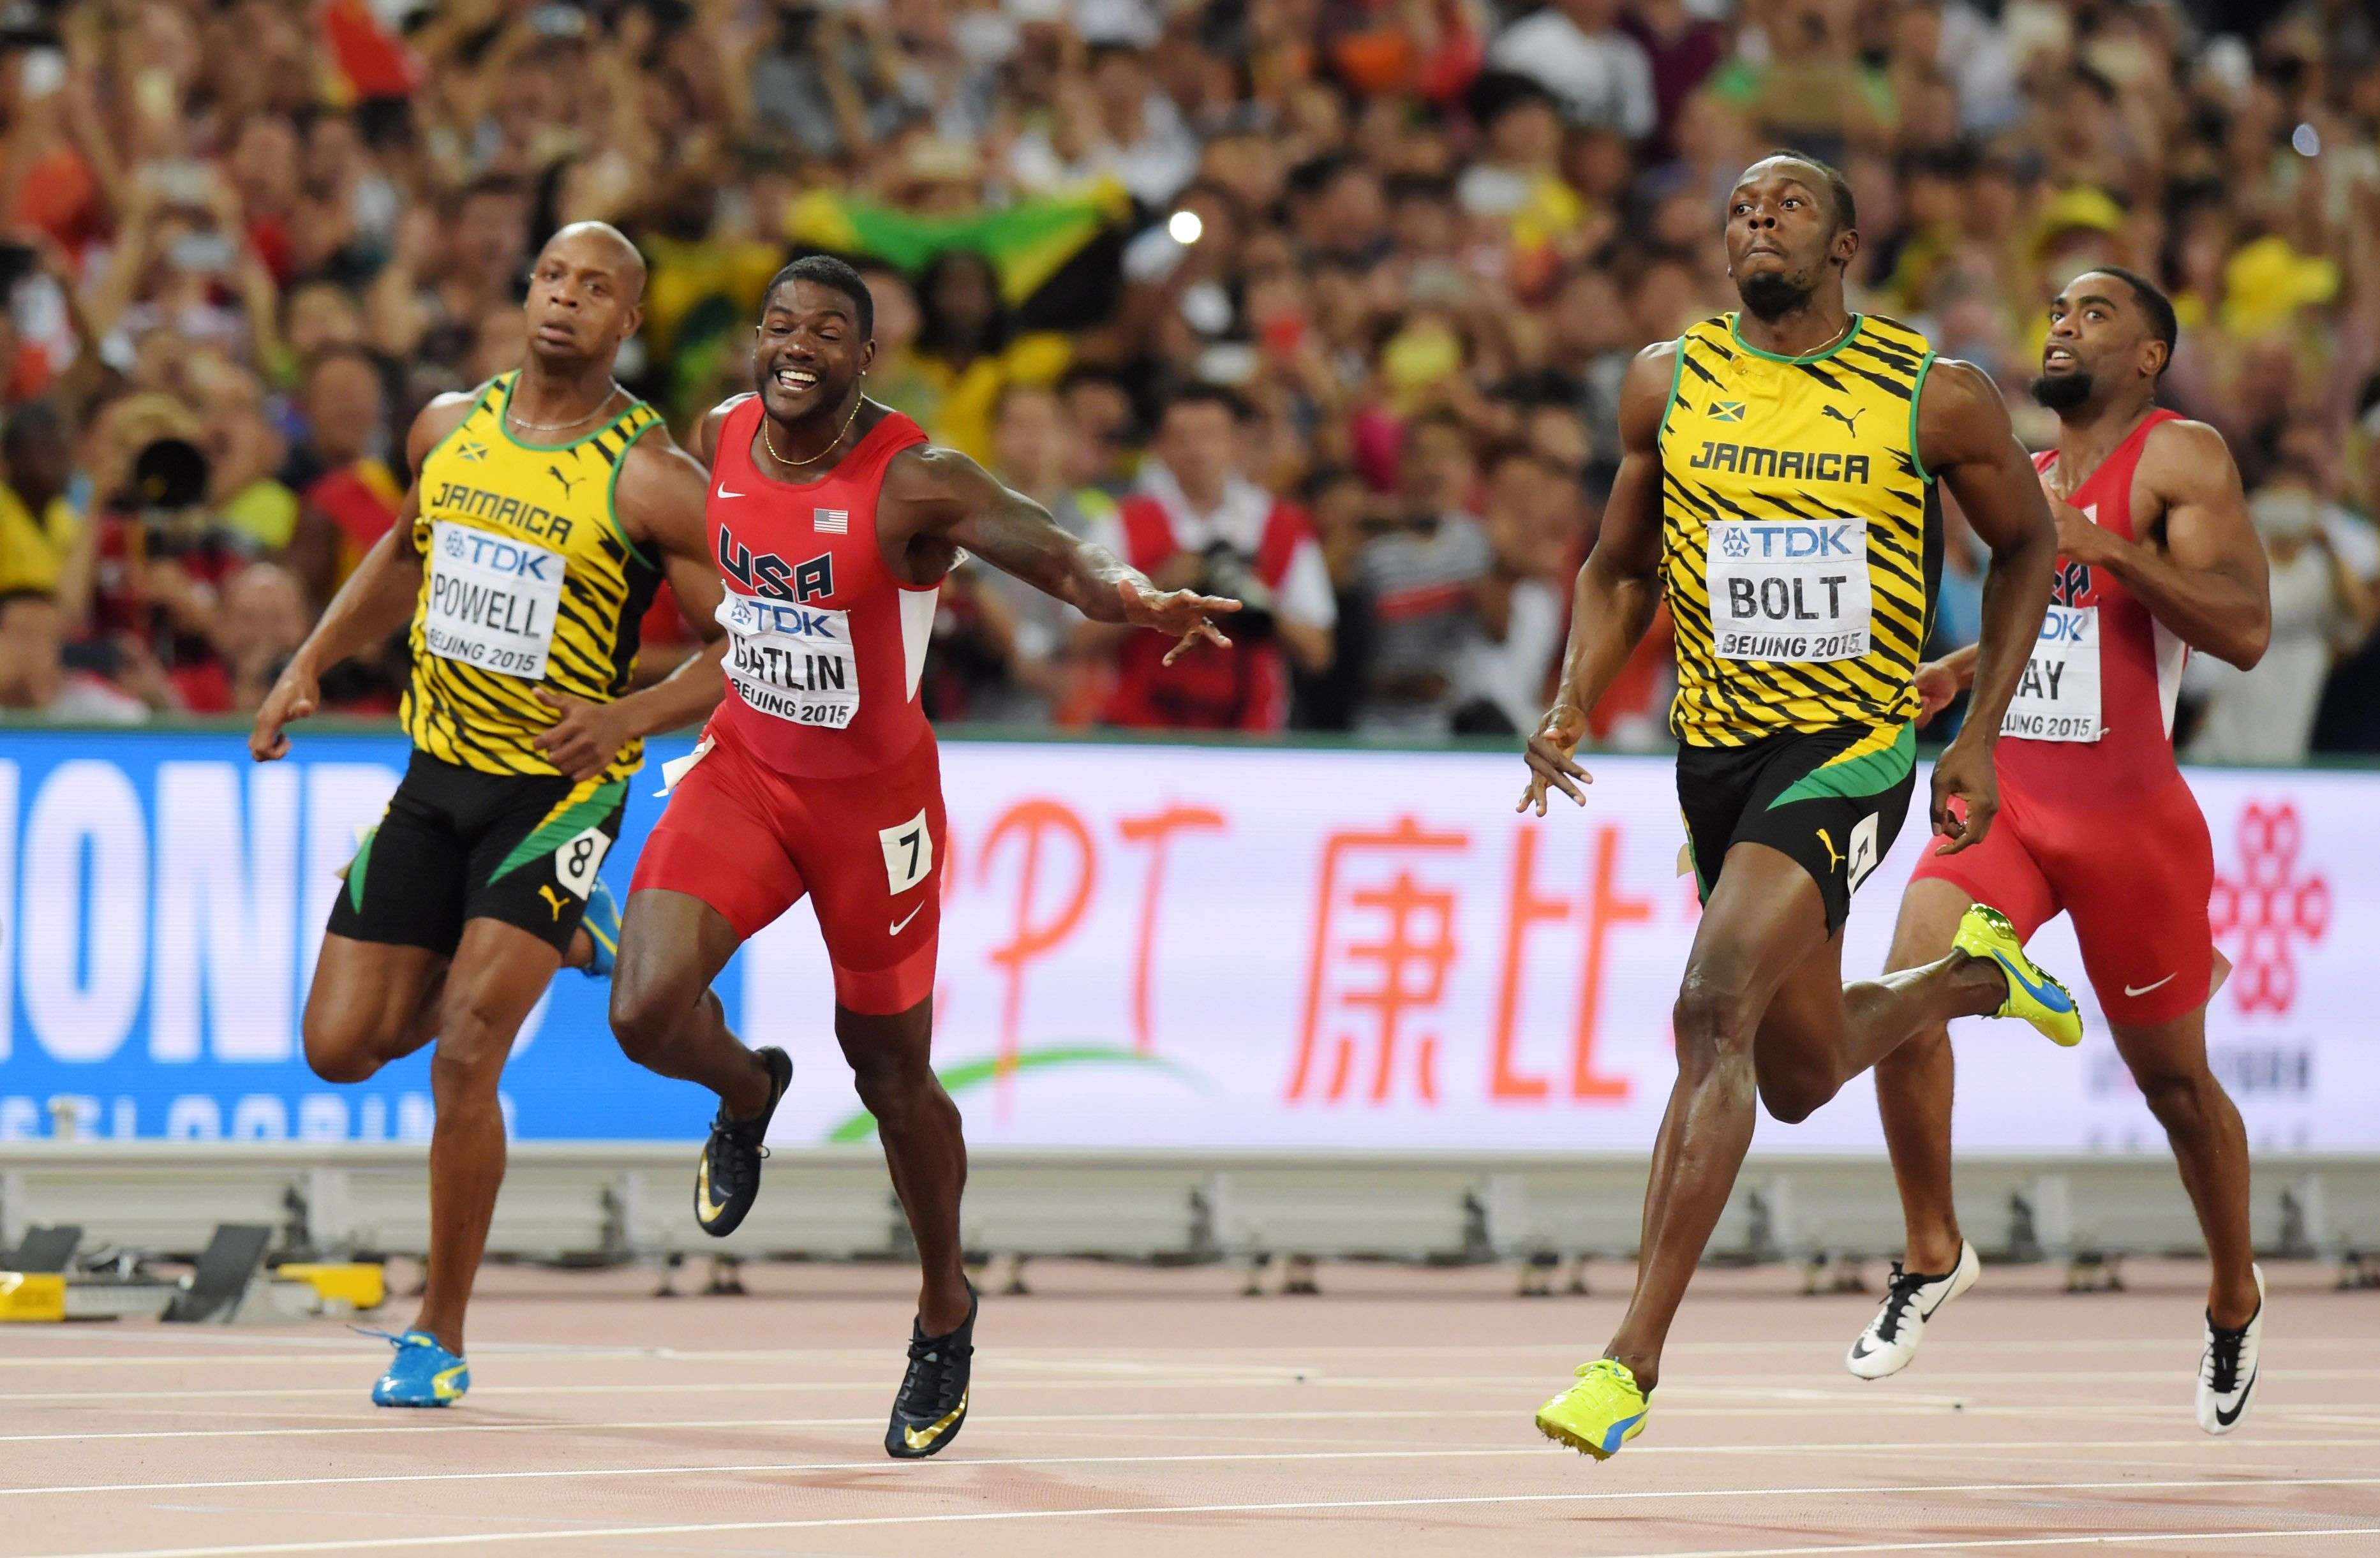 Aug 23, 2015; Beijing, China; Usain Bolt (JAM) reacts after defeating Justin Gatlin (USA) to win the 100m in 9.79 to 9.80 during the IAAF World Championships in Athletics at National Stadium. From left: Asafa Powell (JAM), Gatlin, Bolt and Tyson Gay (USA). Mandatory Credit: Kirby Lee-USA TODAY Sports